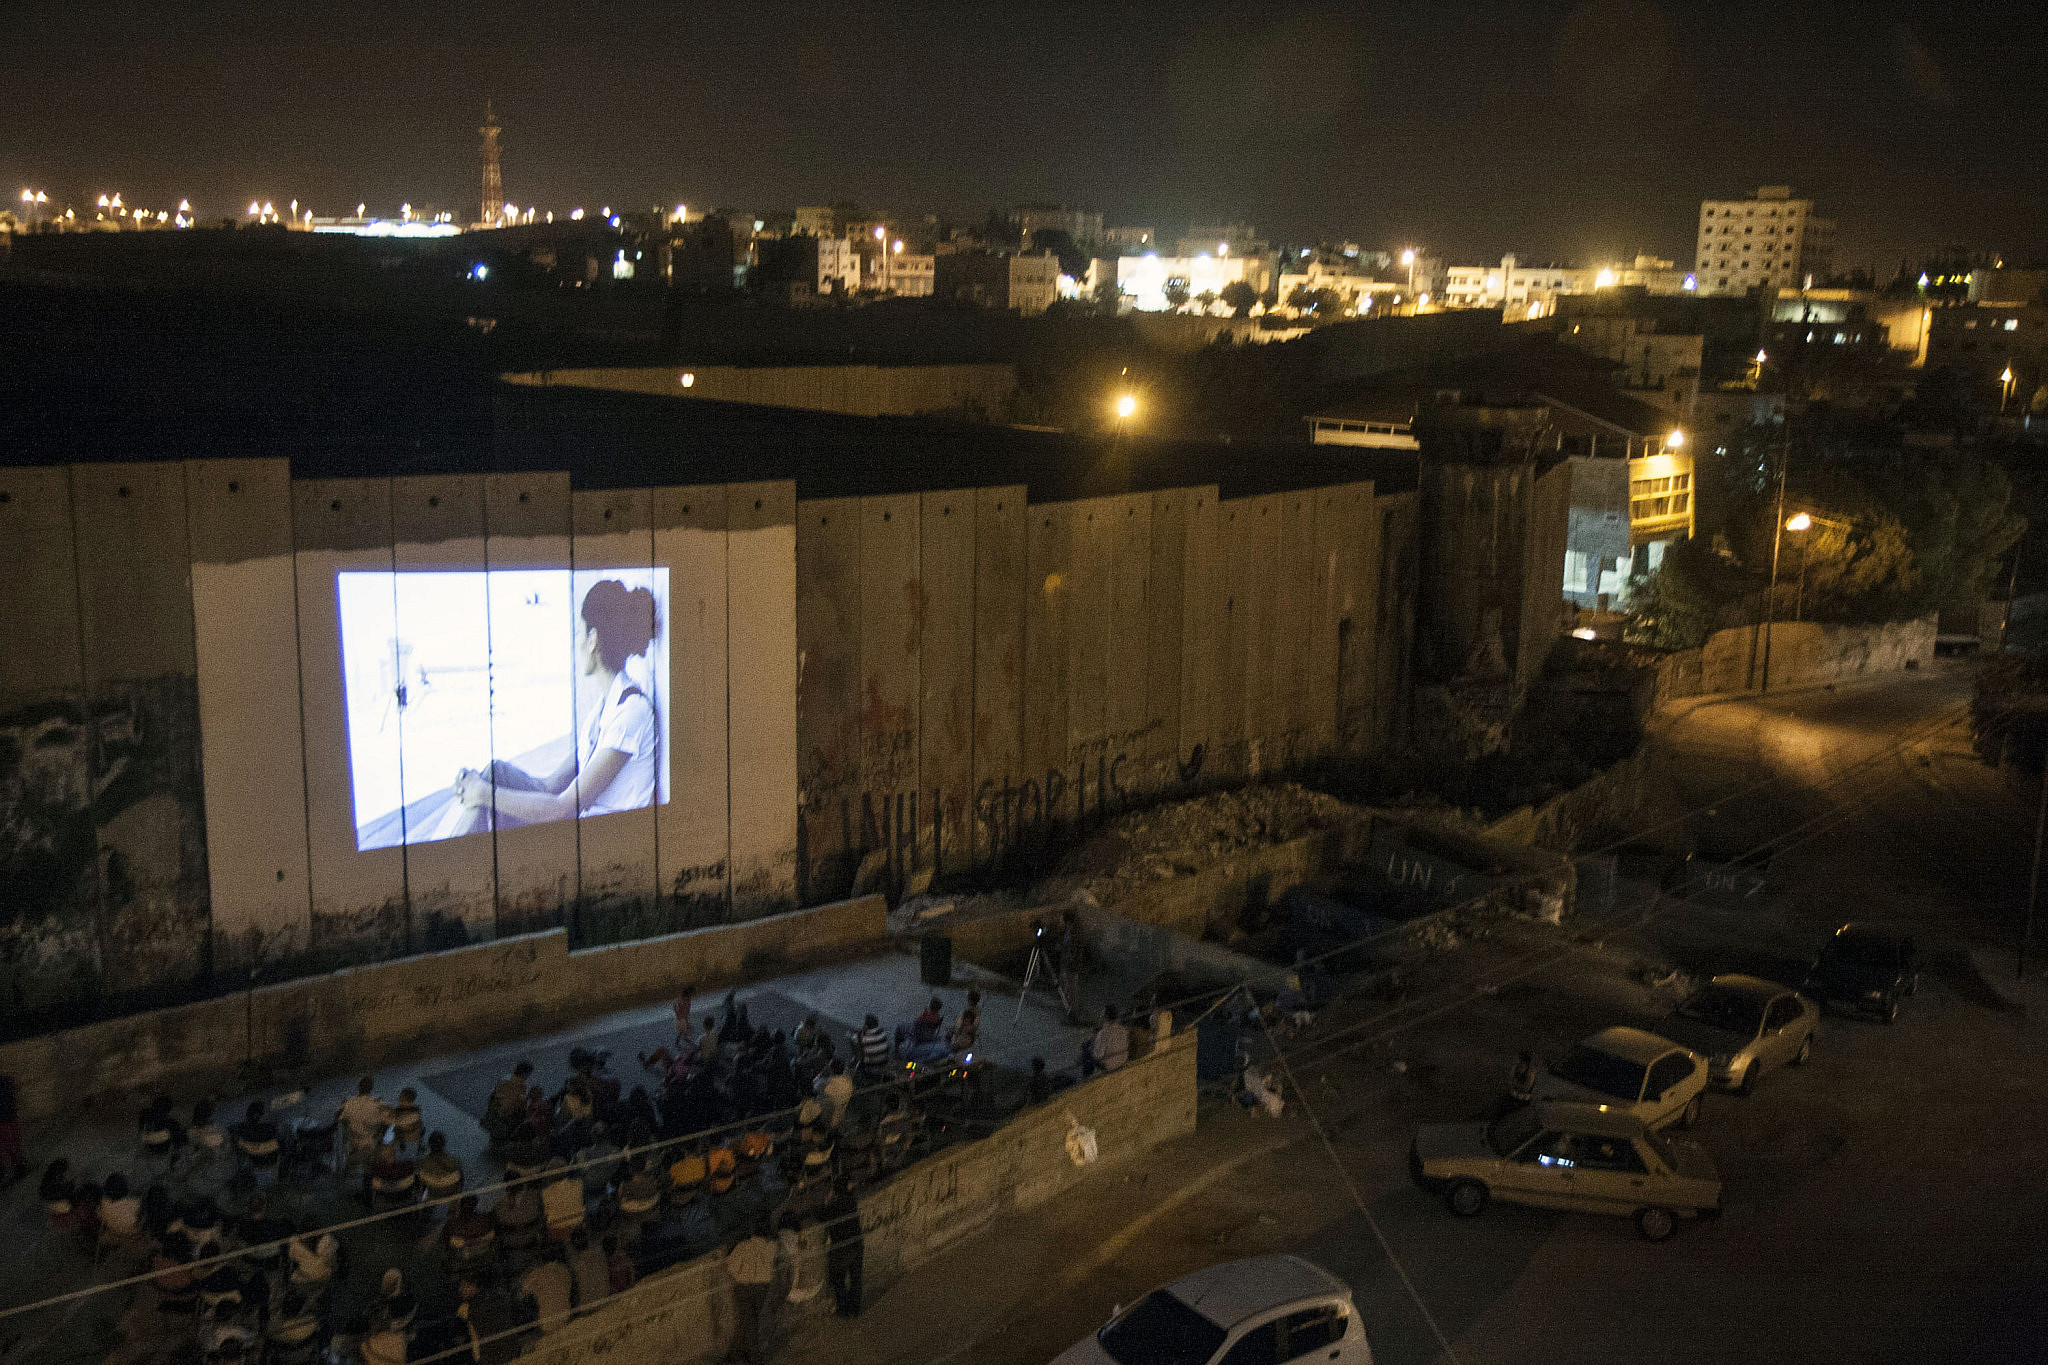 Palestinians watch a film screened on the Israeli Separation Wall as part of a festival, Aida refugee camp, August 29, 2008. (Anne Paq/Activestills)